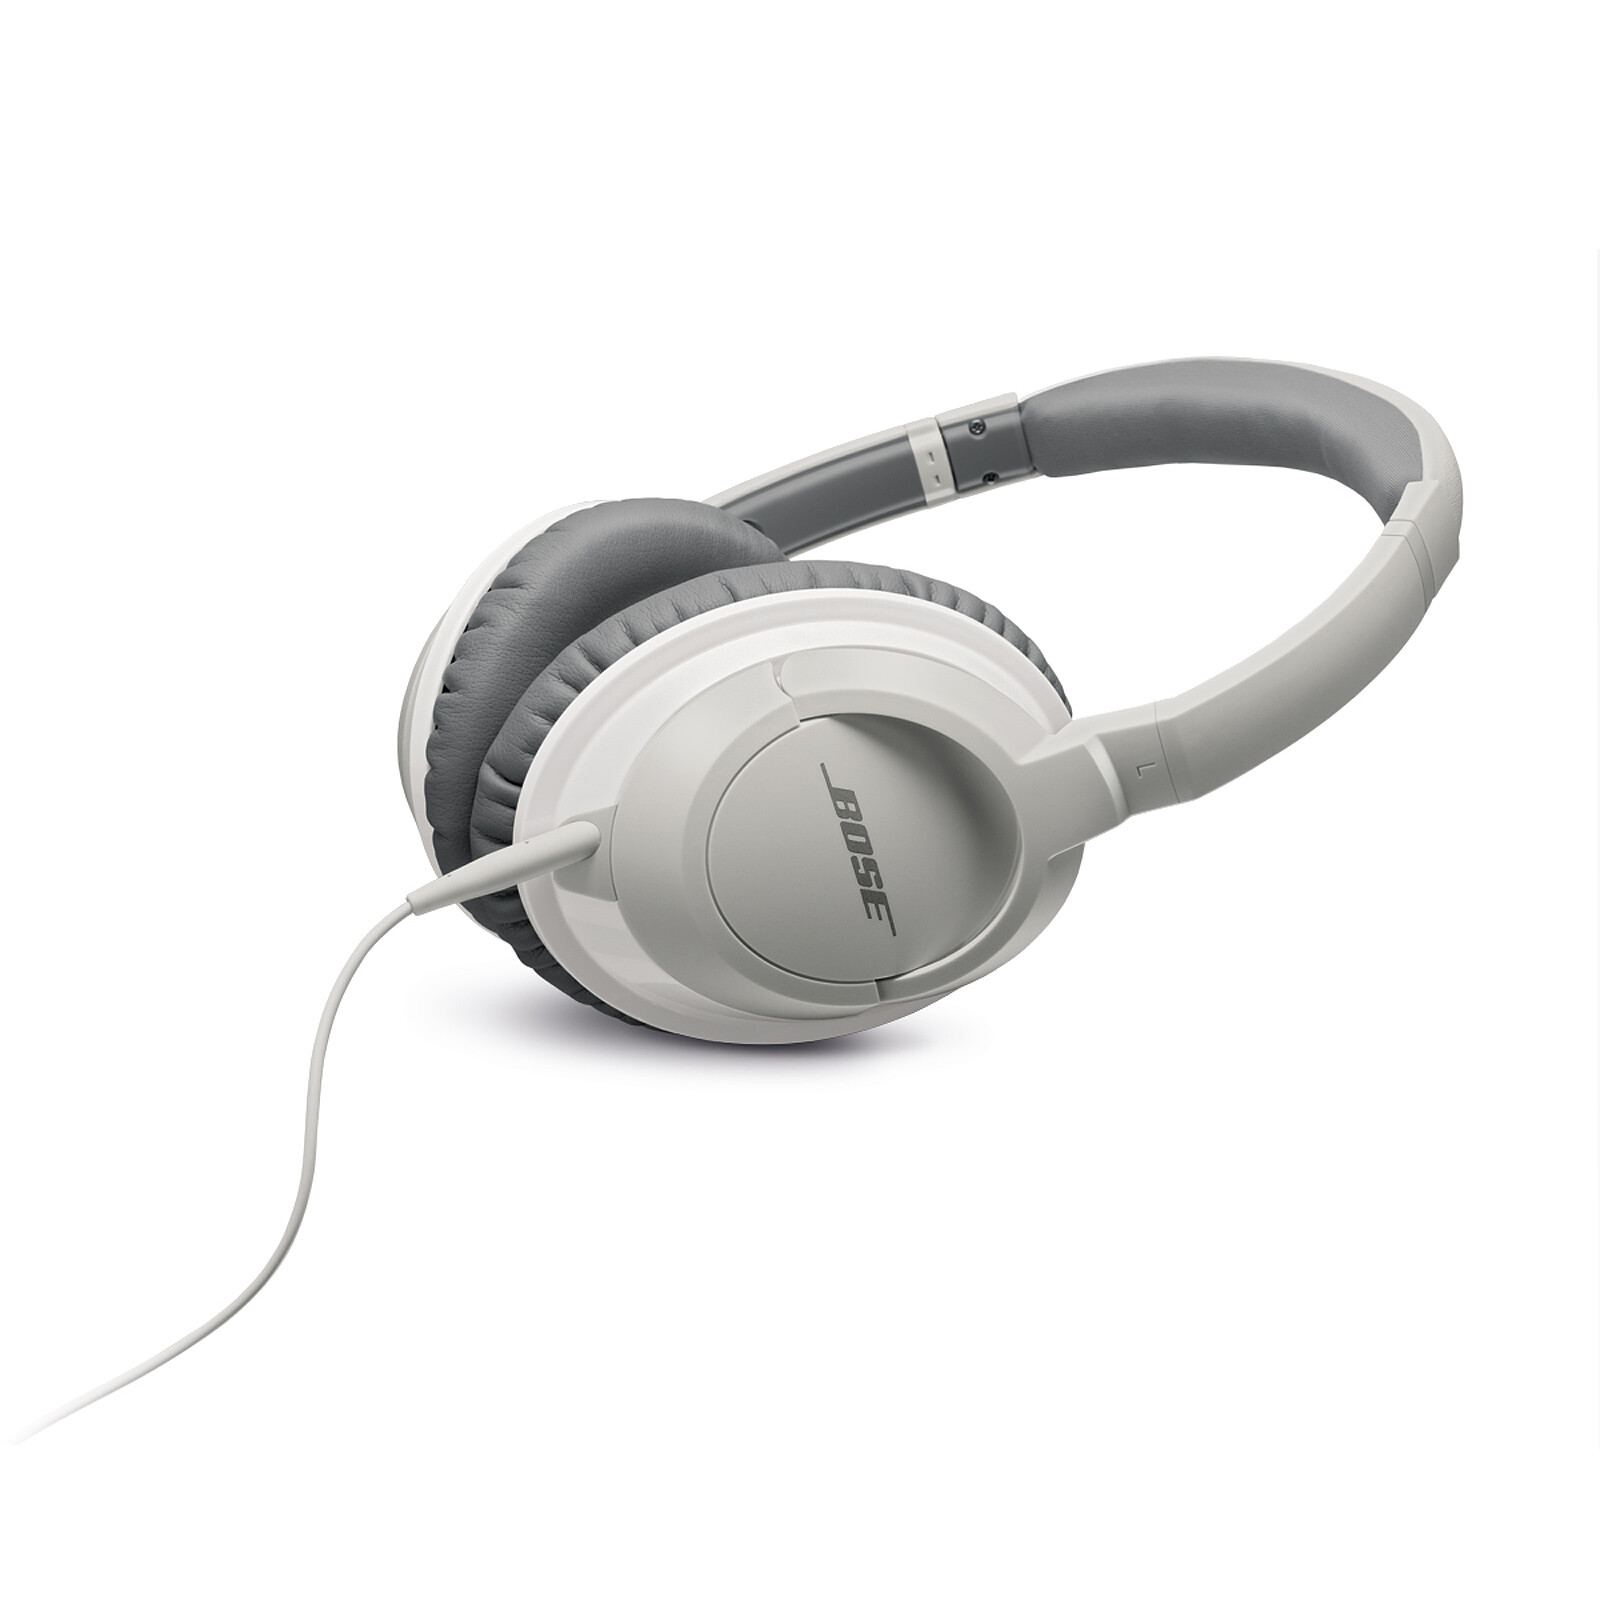 AE2i Bose 2x Coussinets auriculaires blanc pour Bose AE2 AE2 Wireless 